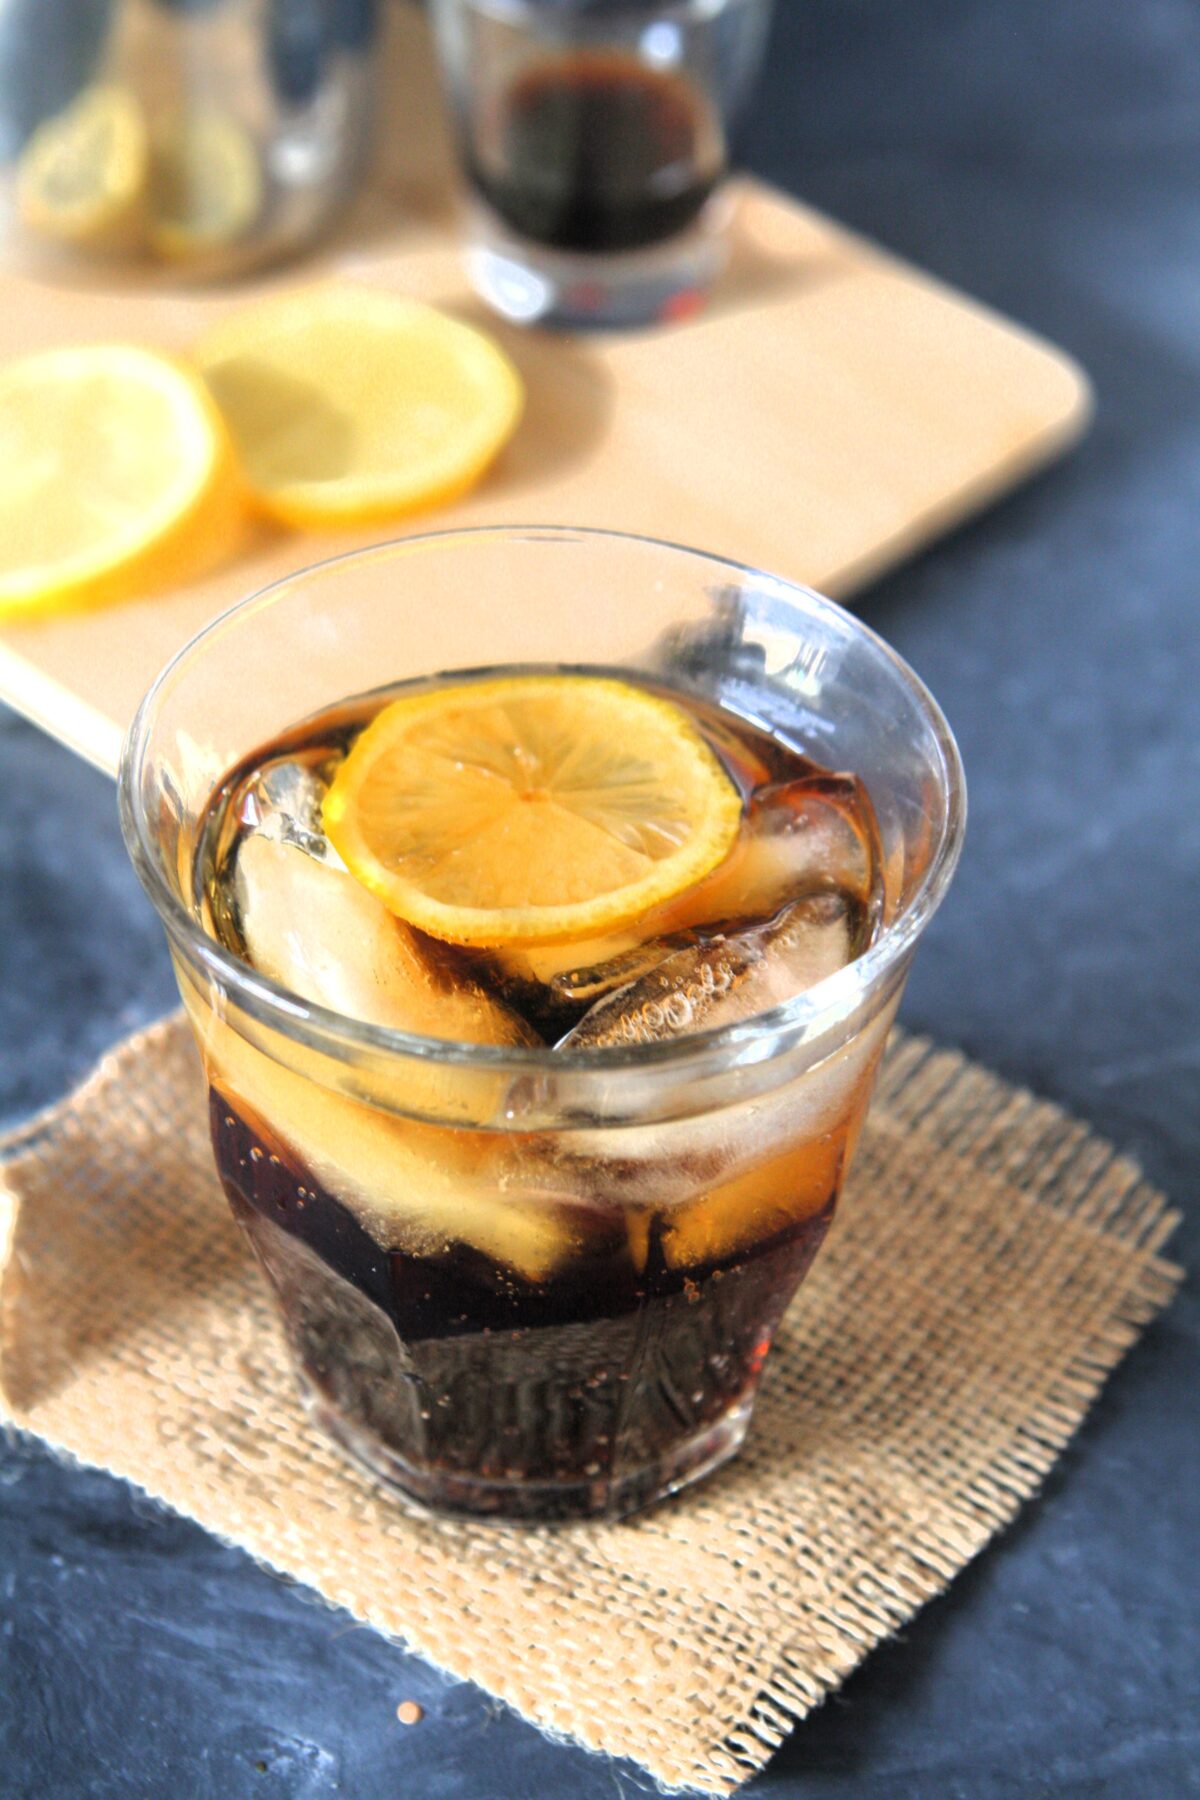 Try this Refreshing Iced Coffee and Lemon Tonic Drink Recipe for a tasty and interesting twist to your regular iced coffee, with a blend of smooth coffee, bitter tonic, and zesty lemon!